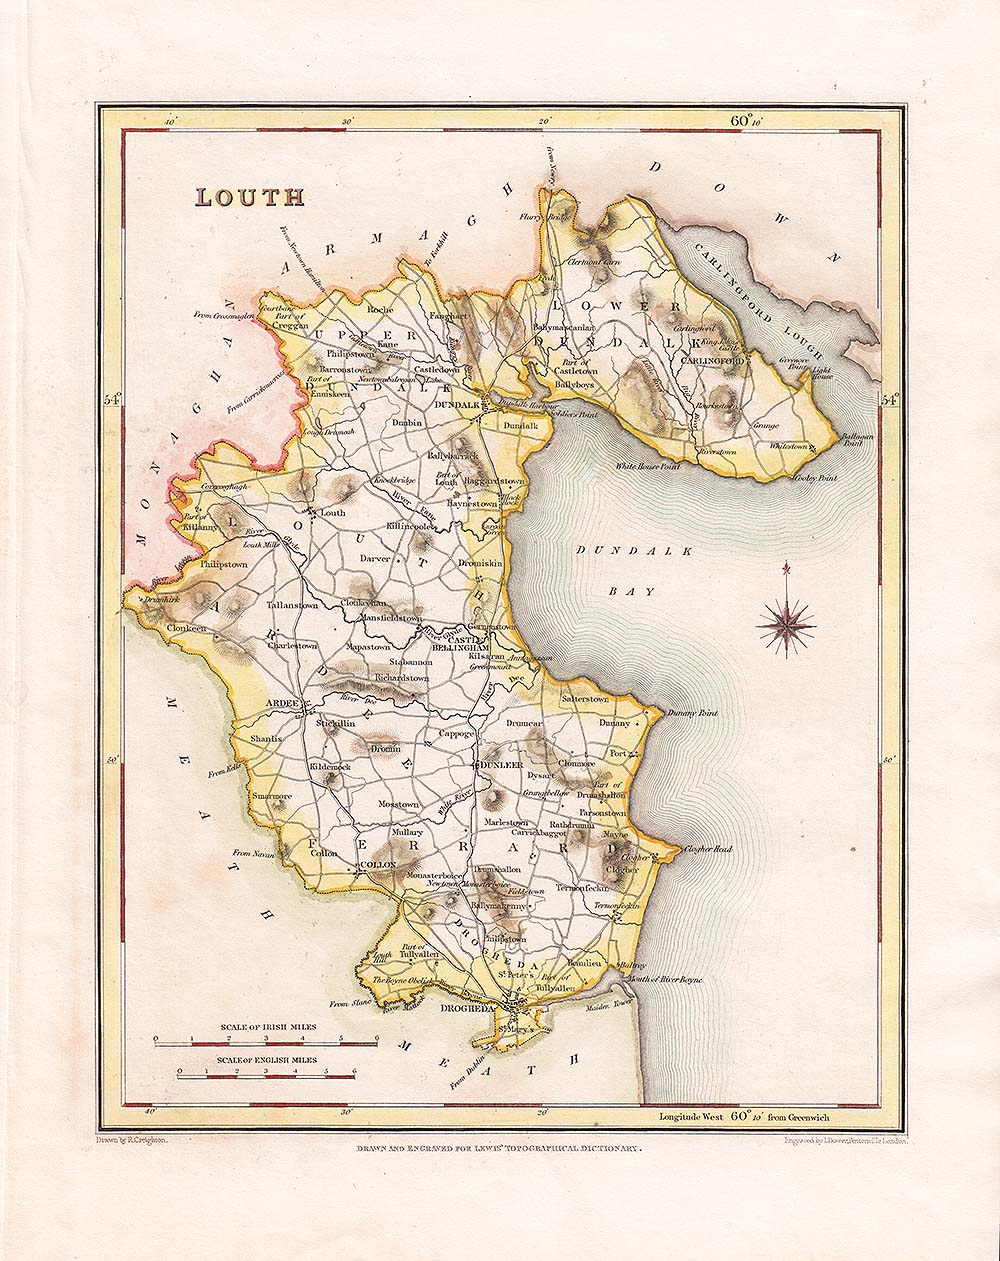 Louth  -  Lewis Atlas comprising the Counties of Ireland